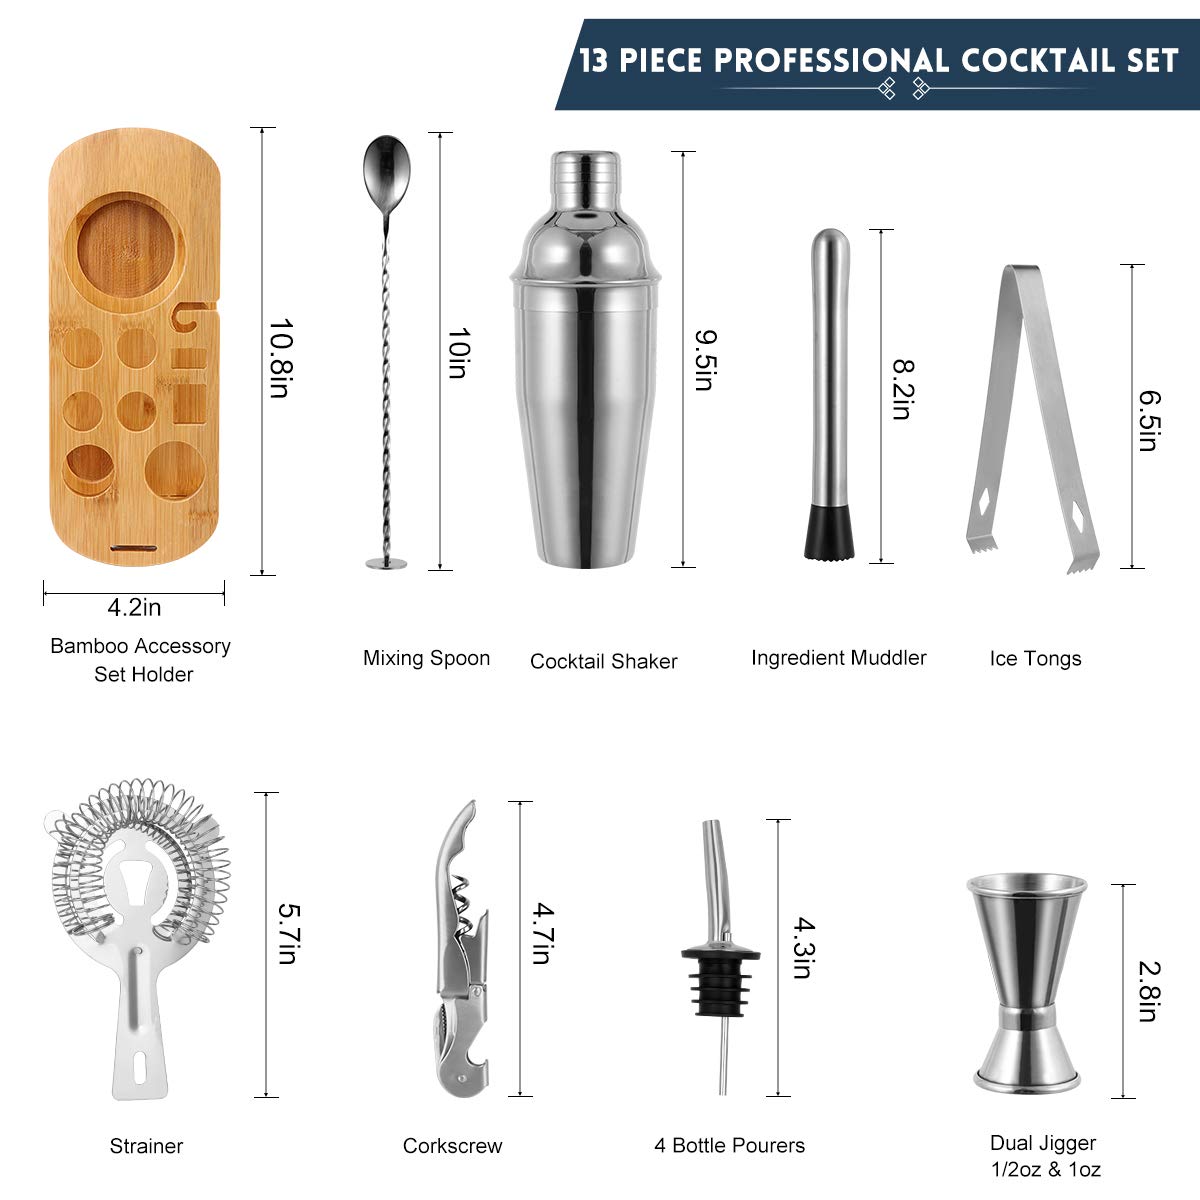 Cocktail Shaker Bar Mixer Set-Professional Bartender Premium Stainless Steel 25oz. Perfect For Homemade Party Drinks with Your Favourite Liquor Mixes. This 12 Piece Kit Has All The Essentials You Need